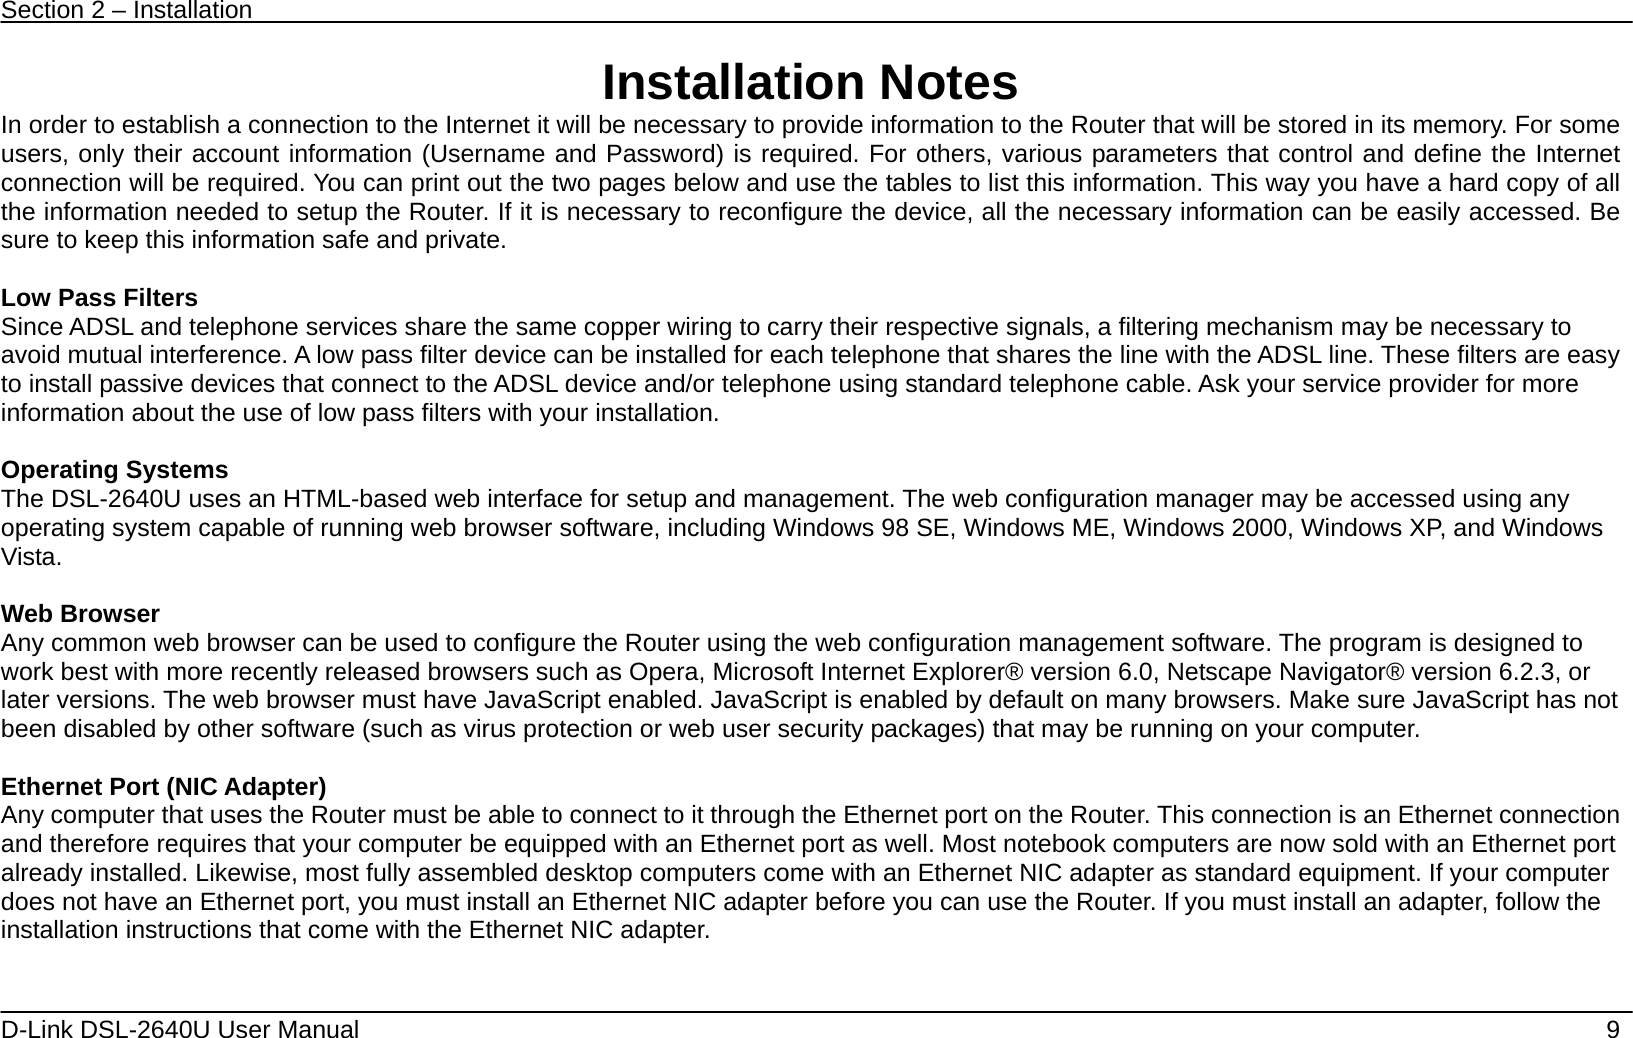 Section 2 – Installation   D-Link DSL-2640U User Manual    9 Installation Notes In order to establish a connection to the Internet it will be necessary to provide information to the Router that will be stored in its memory. For some users, only their account information (Username and Password) is required. For others, various parameters that control and define the Internet connection will be required. You can print out the two pages below and use the tables to list this information. This way you have a hard copy of all the information needed to setup the Router. If it is necessary to reconfigure the device, all the necessary information can be easily accessed. Be sure to keep this information safe and private.  Low Pass Filters Since ADSL and telephone services share the same copper wiring to carry their respective signals, a filtering mechanism may be necessary to avoid mutual interference. A low pass filter device can be installed for each telephone that shares the line with the ADSL line. These filters are easy to install passive devices that connect to the ADSL device and/or telephone using standard telephone cable. Ask your service provider for more information about the use of low pass filters with your installation.    Operating Systems The DSL-2640U uses an HTML-based web interface for setup and management. The web configuration manager may be accessed using any operating system capable of running web browser software, including Windows 98 SE, Windows ME, Windows 2000, Windows XP, and Windows Vista.   Web Browser Any common web browser can be used to configure the Router using the web configuration management software. The program is designed to work best with more recently released browsers such as Opera, Microsoft Internet Explorer® version 6.0, Netscape Navigator® version 6.2.3, or later versions. The web browser must have JavaScript enabled. JavaScript is enabled by default on many browsers. Make sure JavaScript has not been disabled by other software (such as virus protection or web user security packages) that may be running on your computer.  Ethernet Port (NIC Adapter) Any computer that uses the Router must be able to connect to it through the Ethernet port on the Router. This connection is an Ethernet connection and therefore requires that your computer be equipped with an Ethernet port as well. Most notebook computers are now sold with an Ethernet port already installed. Likewise, most fully assembled desktop computers come with an Ethernet NIC adapter as standard equipment. If your computer does not have an Ethernet port, you must install an Ethernet NIC adapter before you can use the Router. If you must install an adapter, follow the installation instructions that come with the Ethernet NIC adapter.     